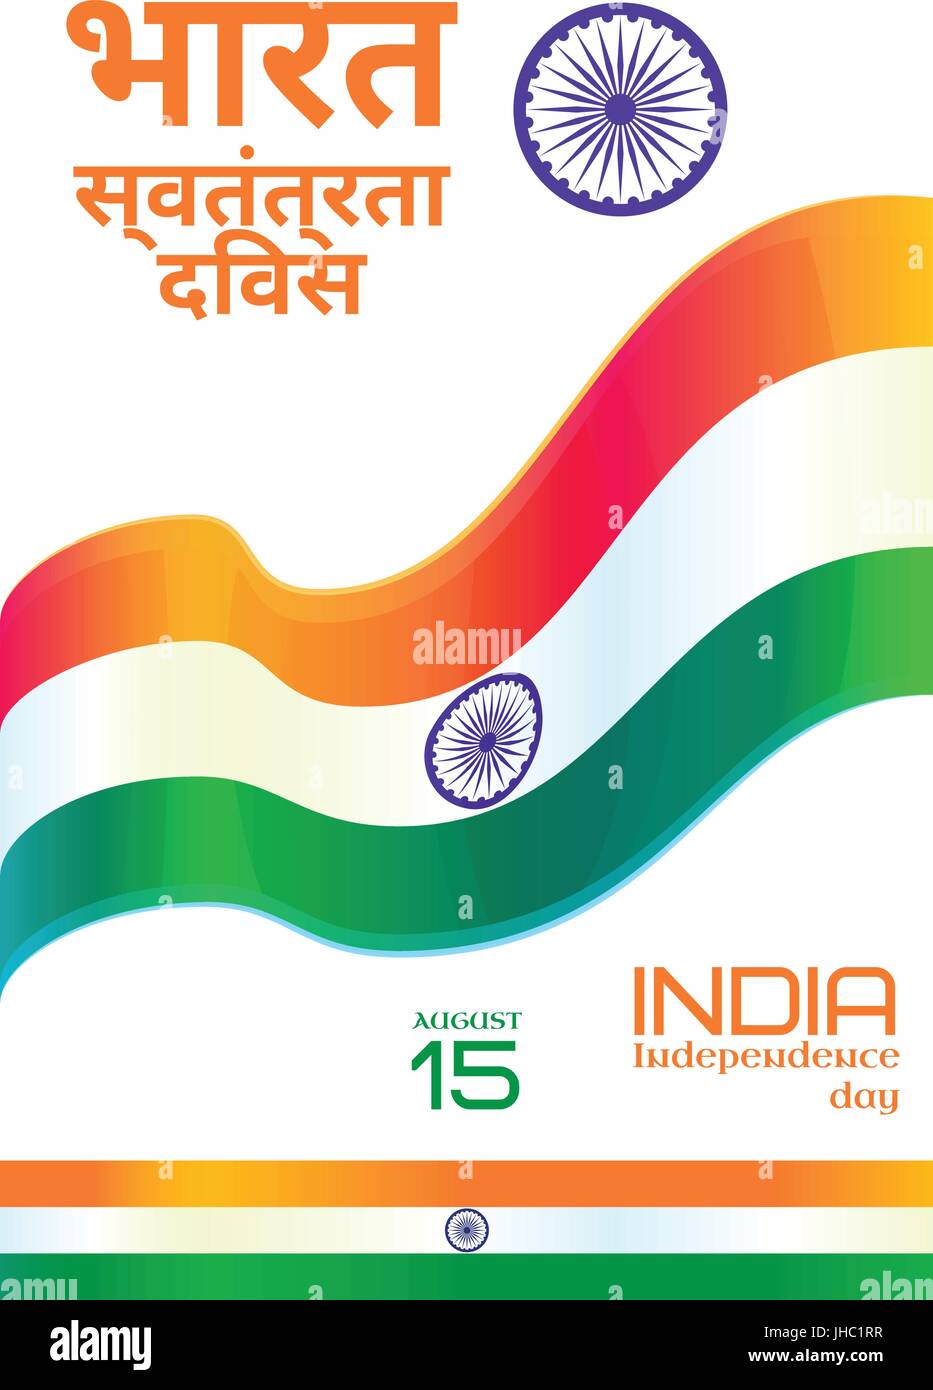 India Independence Day national holiday, 15 August. Set of vector design elements. India National flag, text and Ashoka wheel. Text in Hindi means Ind Stock Vector